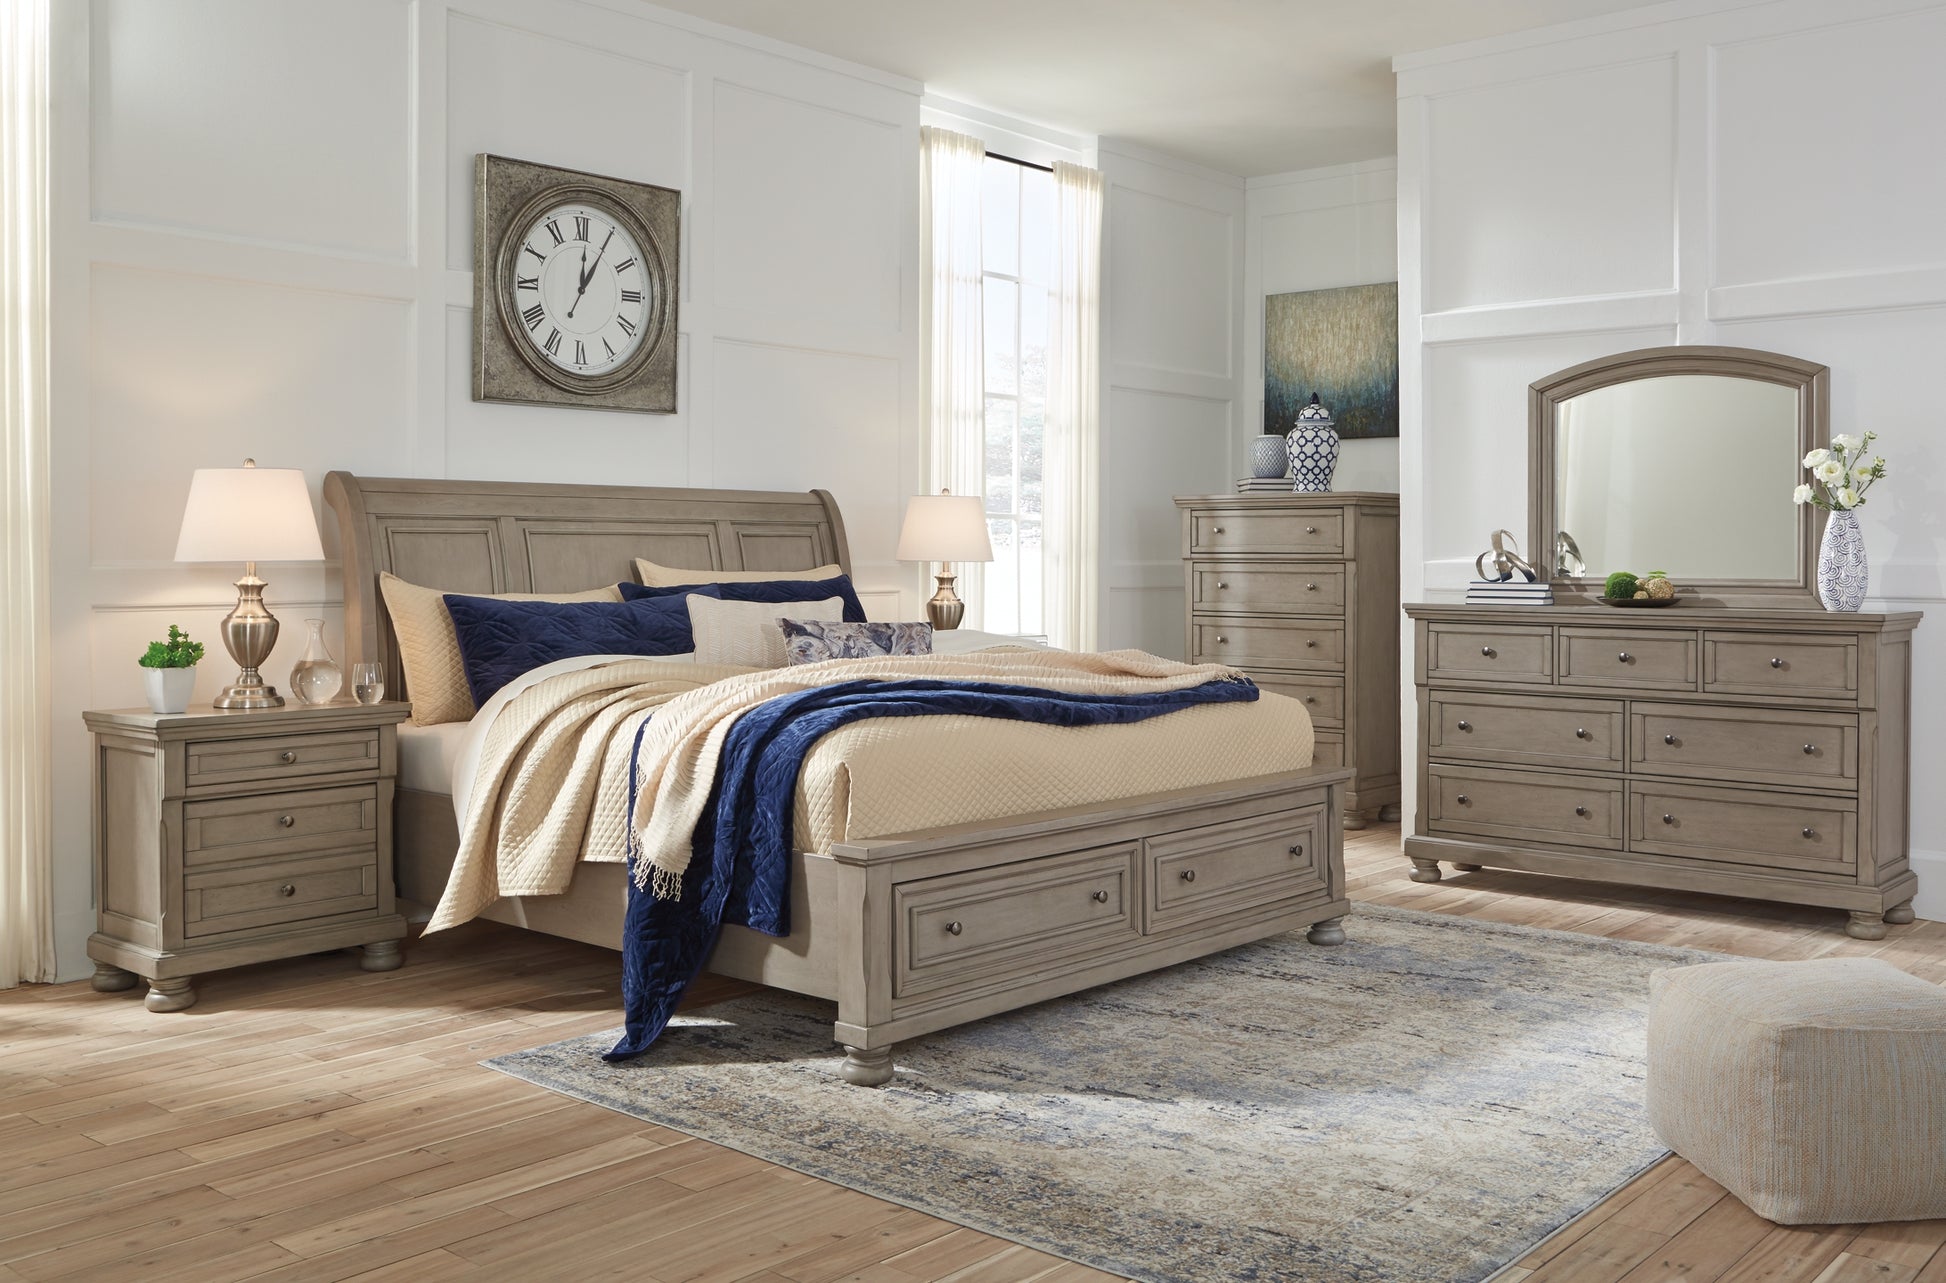 Lettner Queen Sleigh Bed with 2 Storage Drawers with Mirrored Dresser, Chest and 2 Nightstands Wilson Furniture (OH)  in Bridgeport, Ohio. Serving Bridgeport, Yorkville, Bellaire, & Avondale